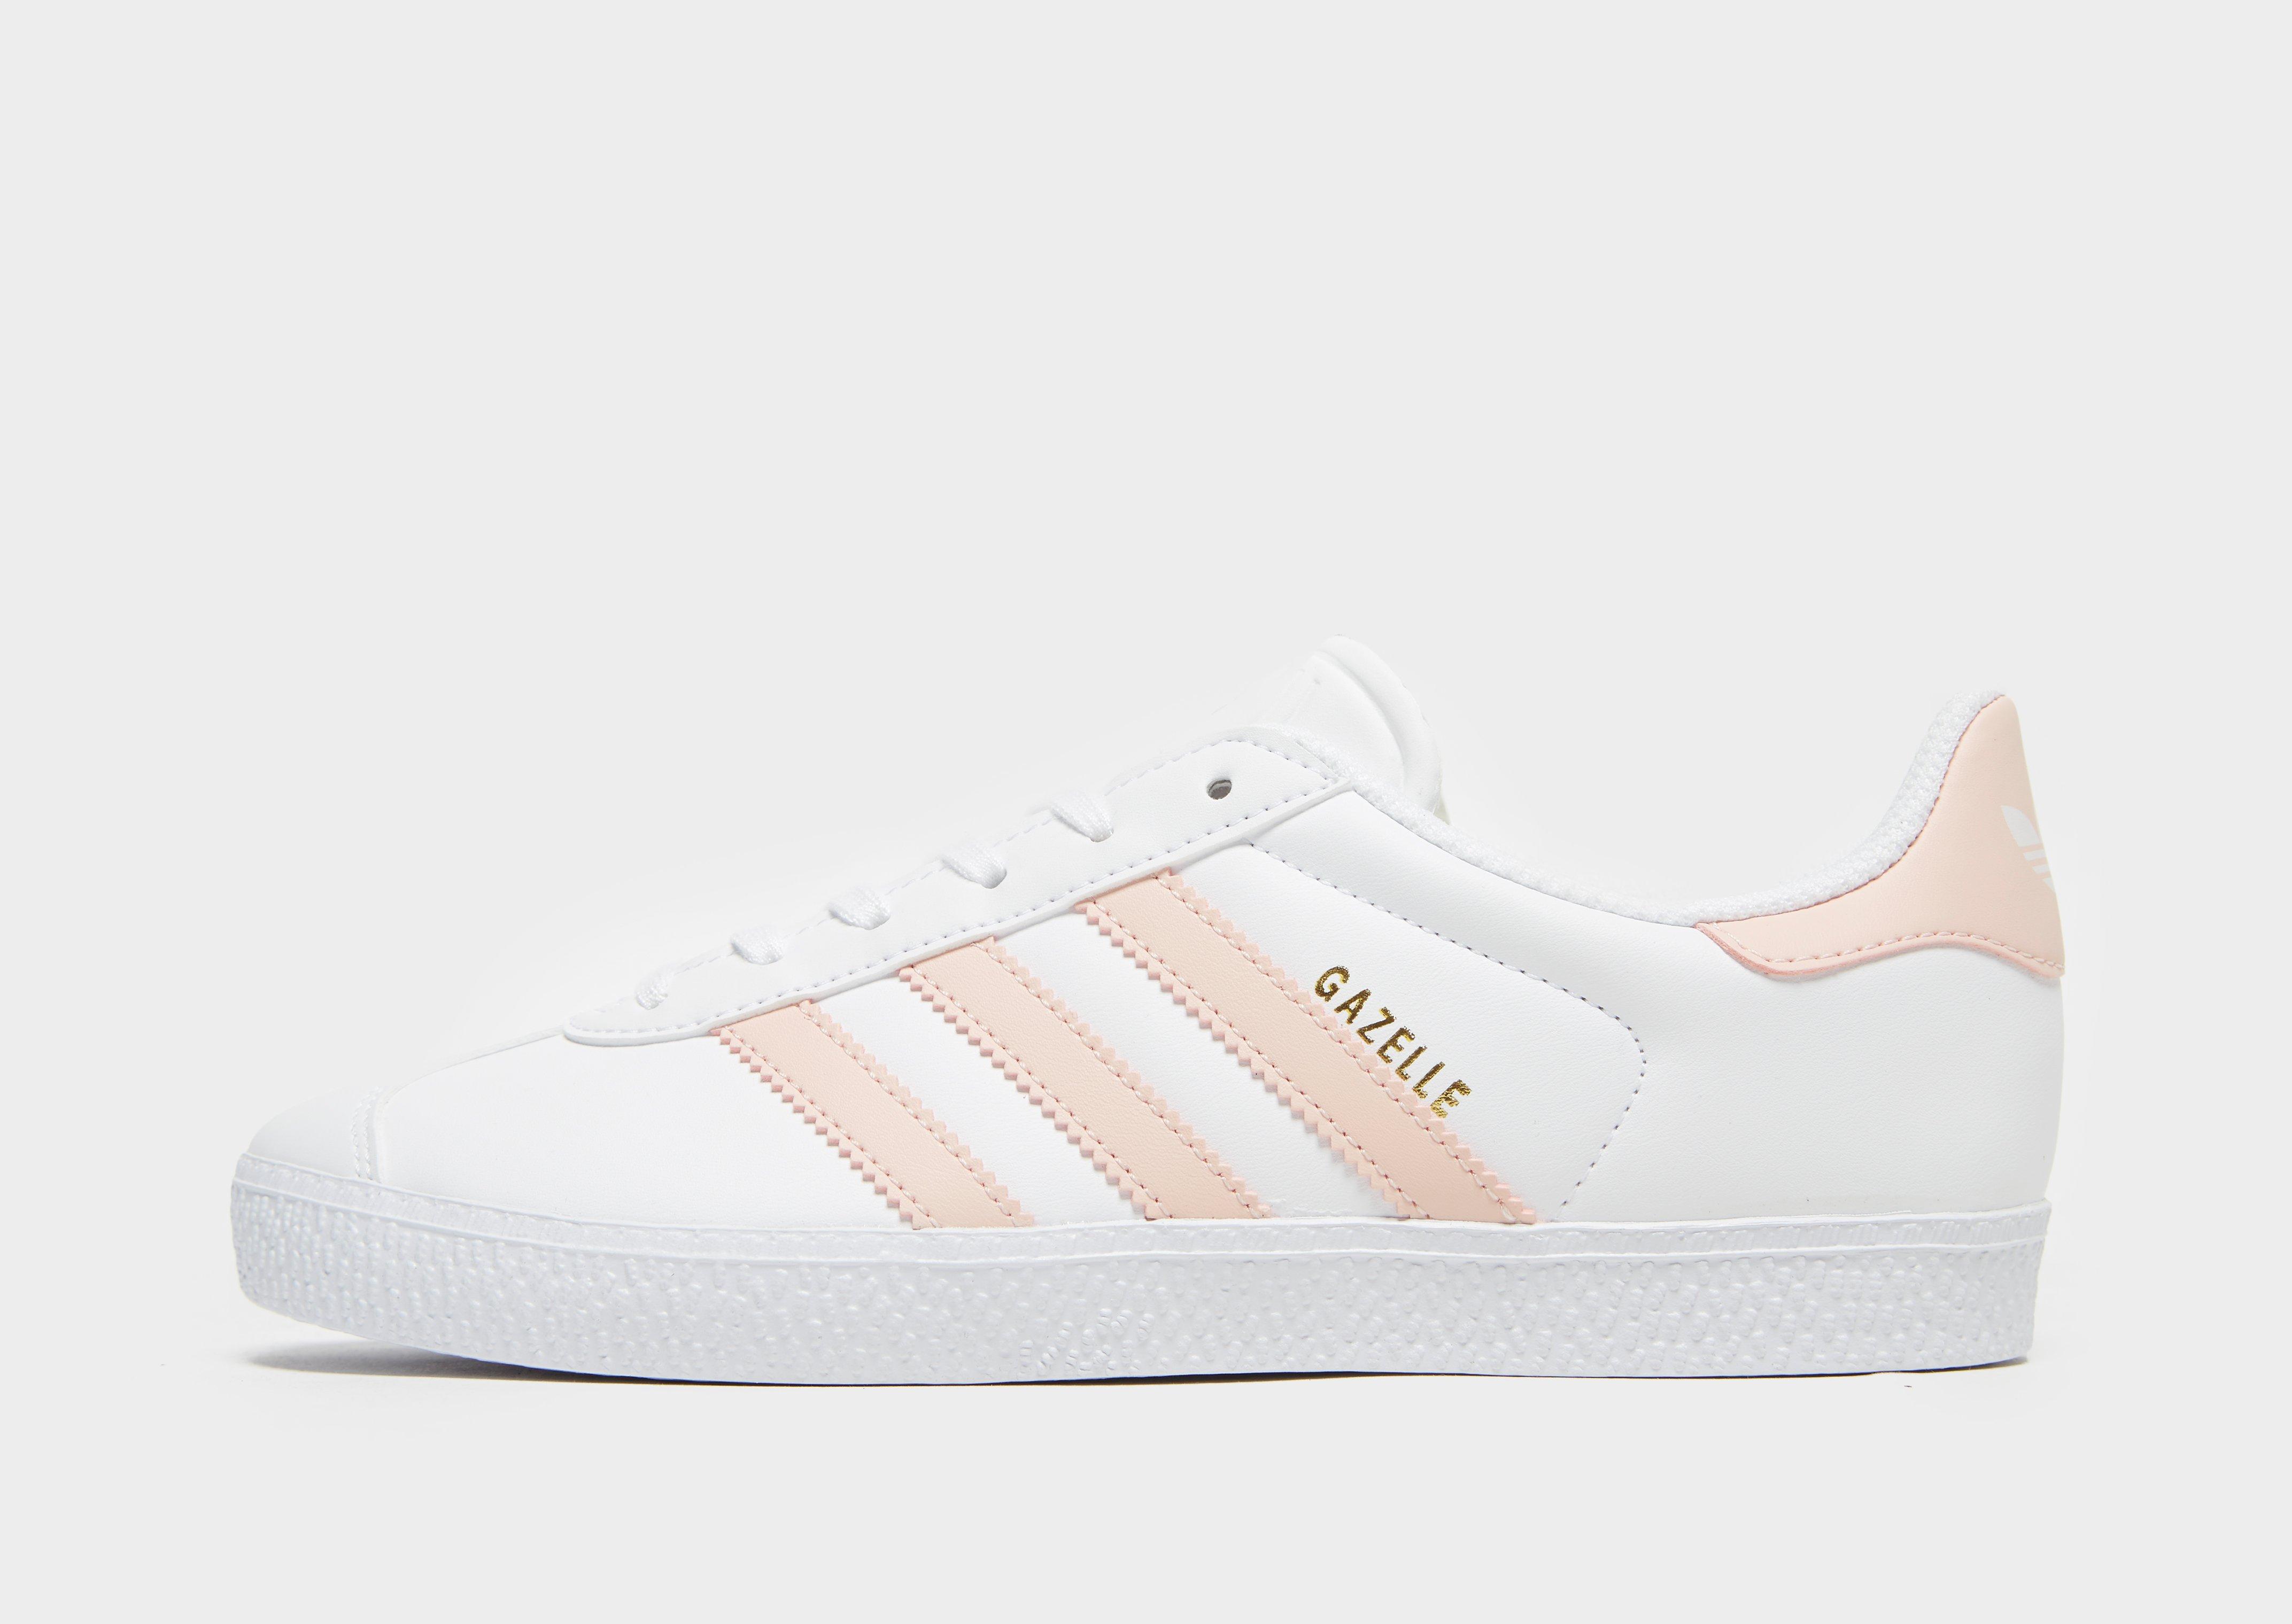 white and pink gazelles